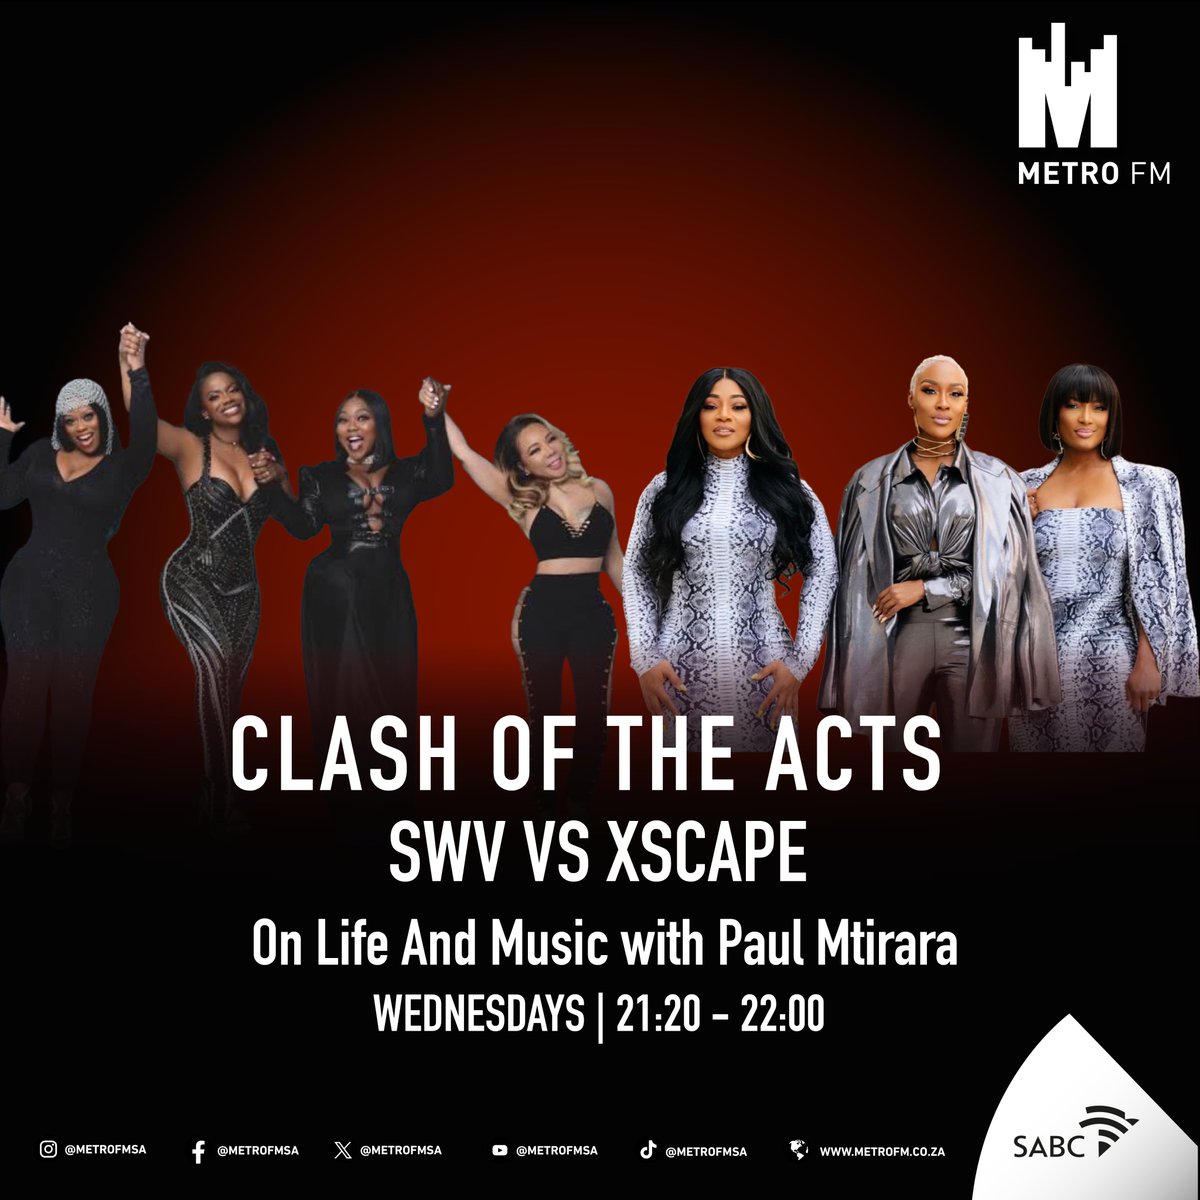 We have SWV versus Xscape on #ClashOfTheActs. Who do you think will take this one? #LifeAndMusic @PaulMtirara